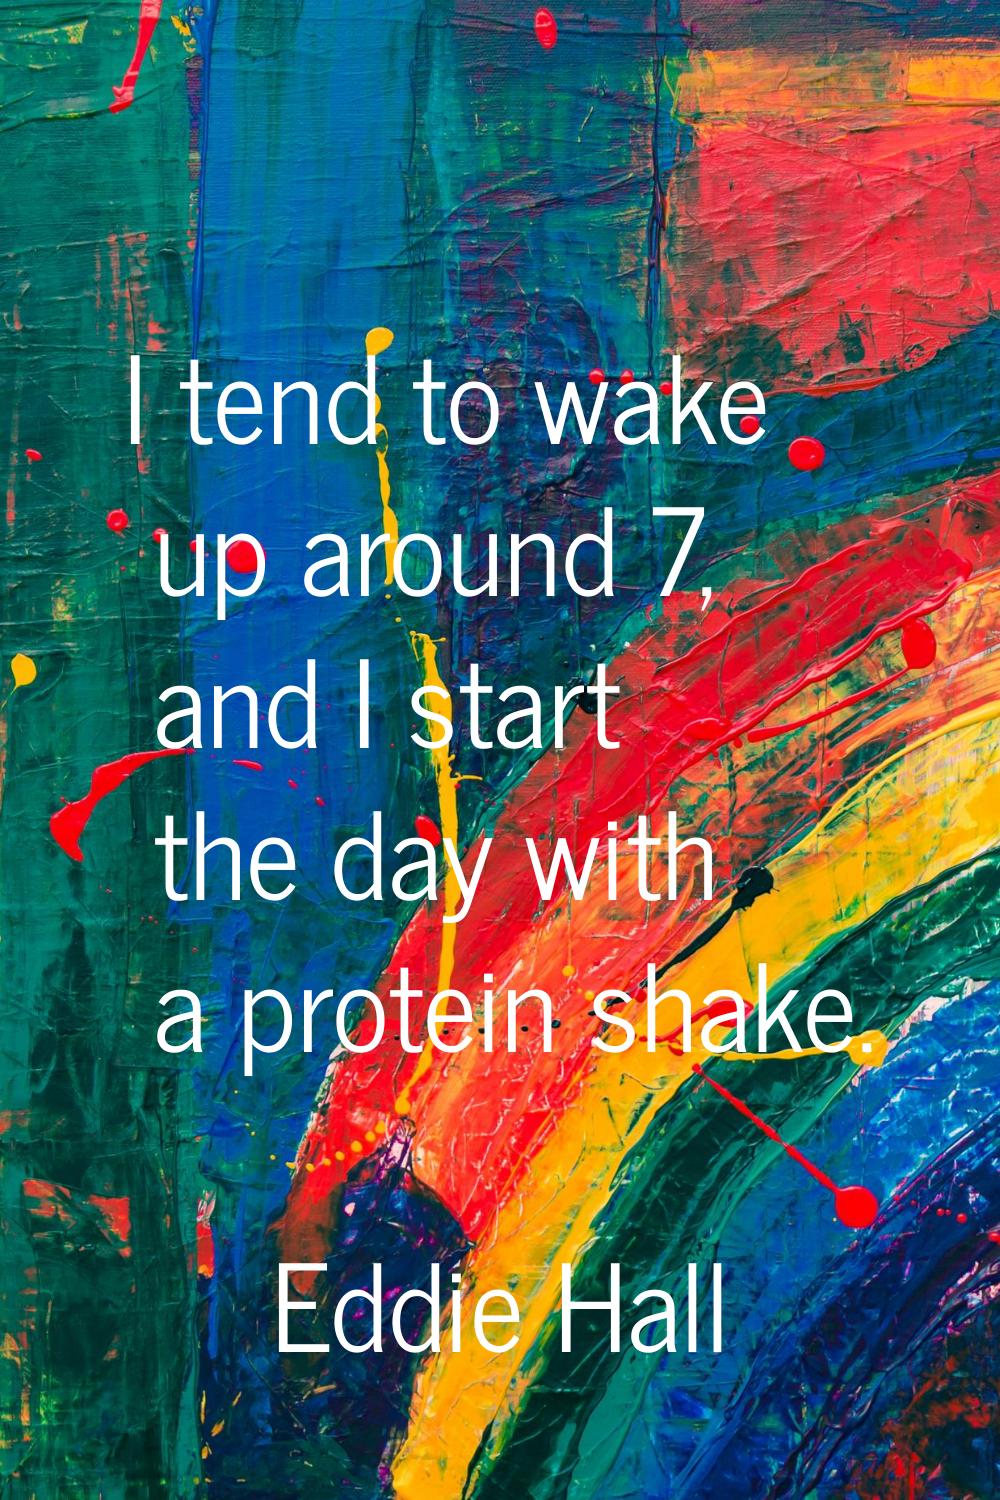 I tend to wake up around 7, and I start the day with a protein shake.